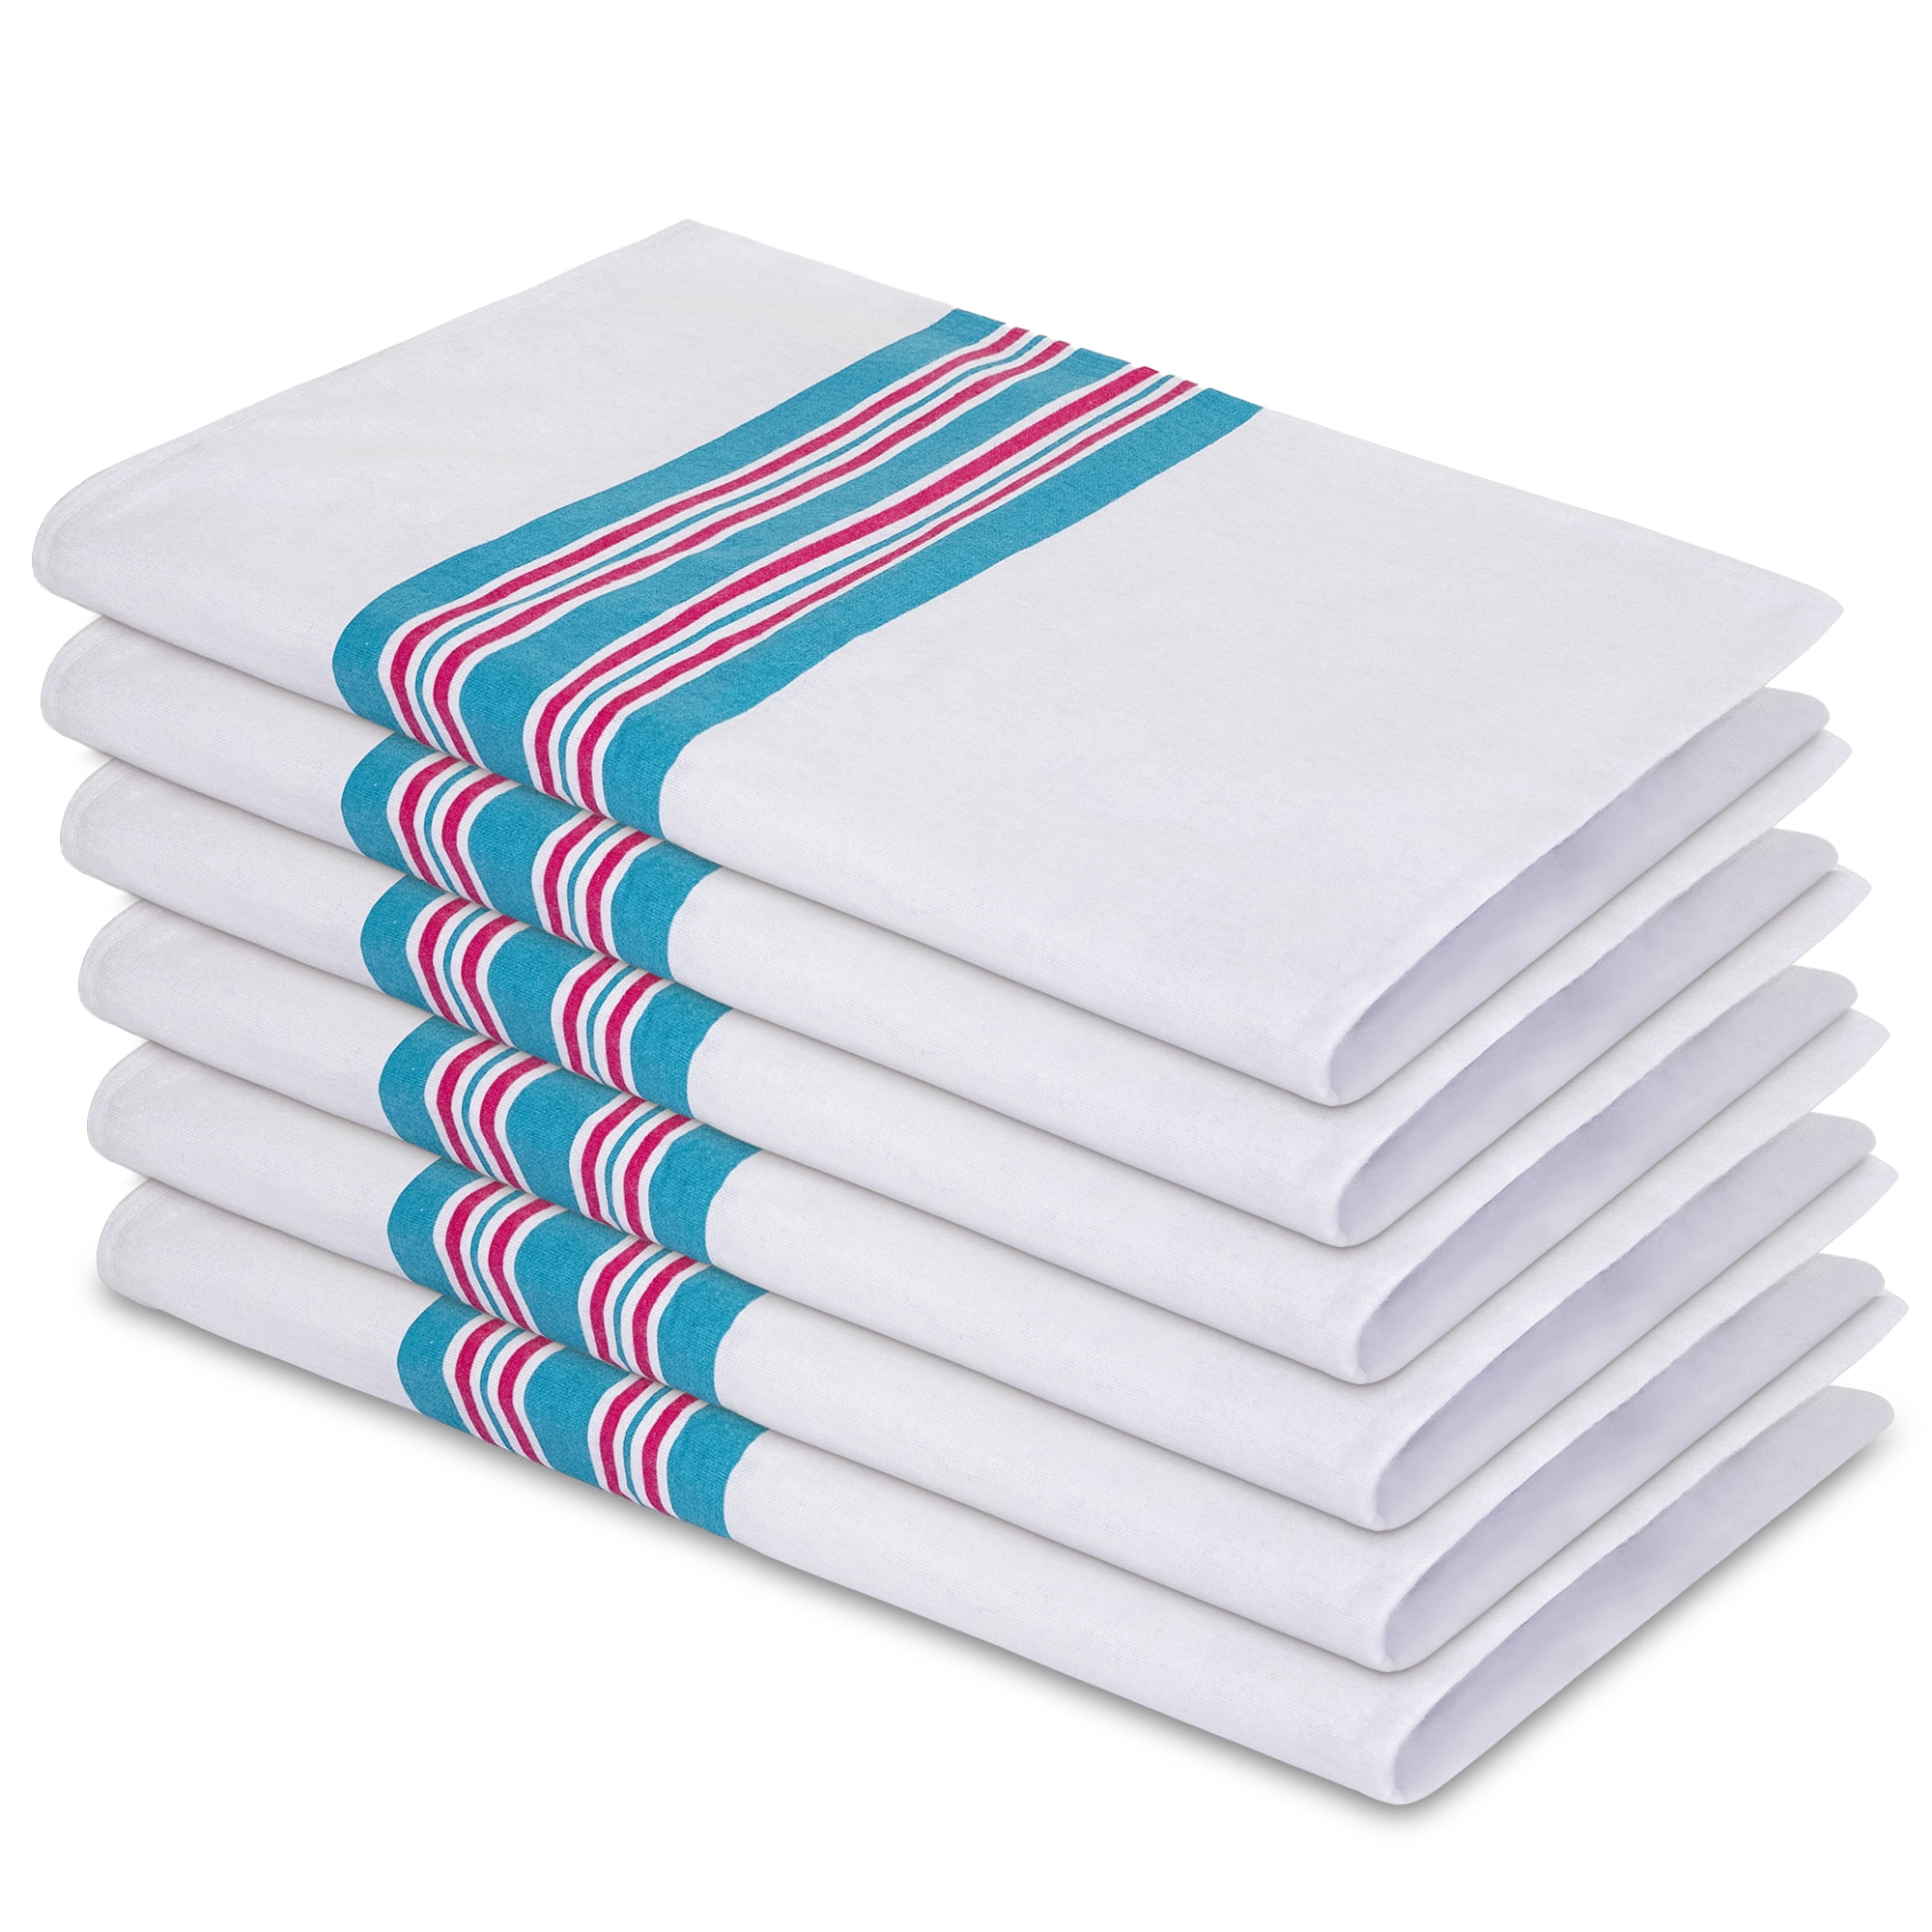 Linteum Textile 12-Pack, 30x40 in Receiving HOSPITAL BABY BLANKETS 100% Cotton 